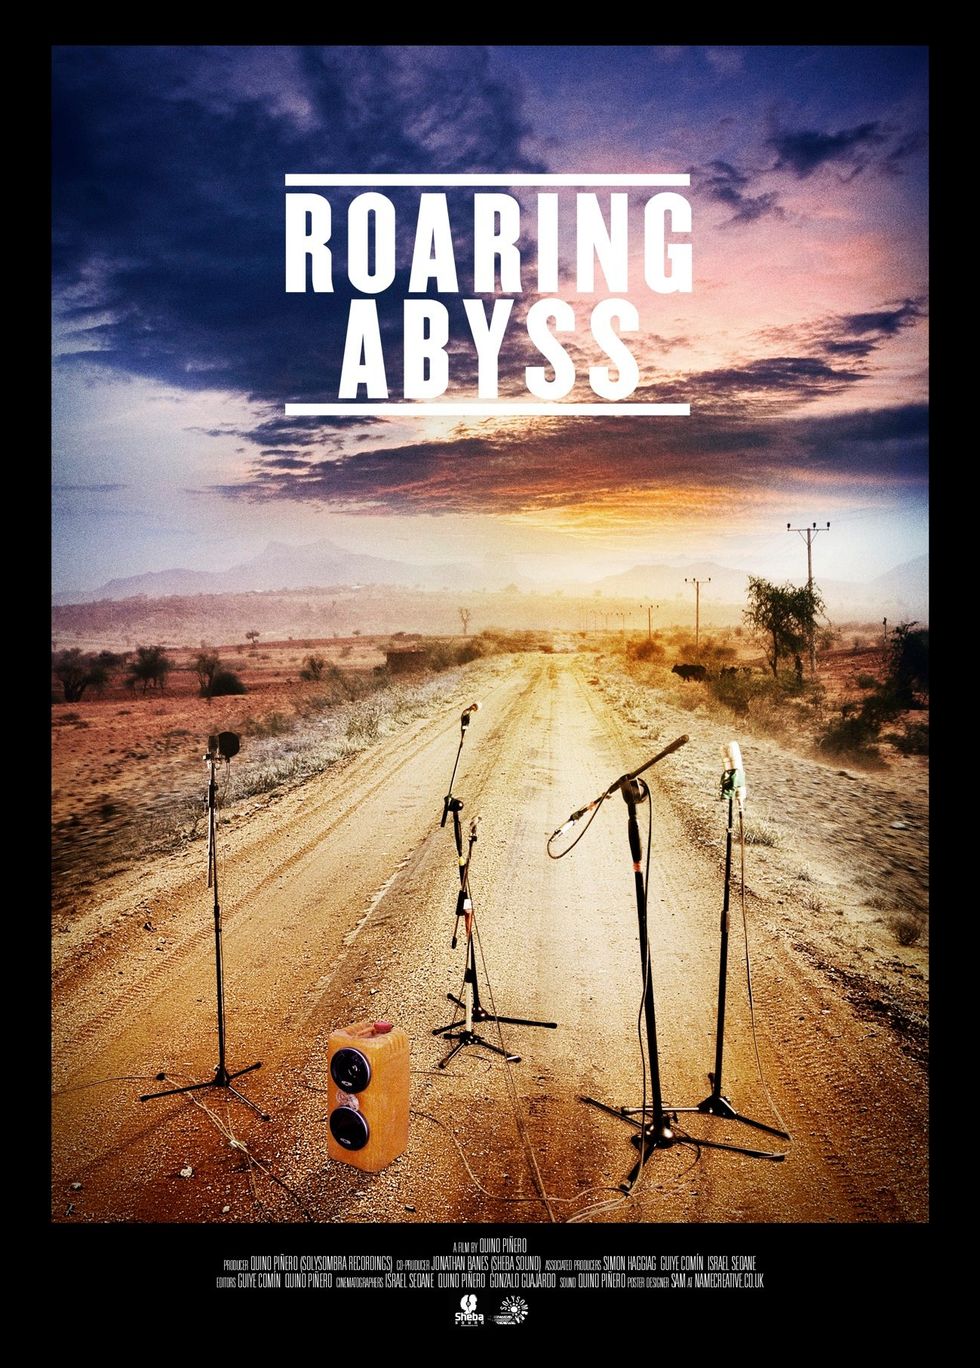 Roaring Abyss: A Documentary Chronicling The Diverse And Ancient Sounds Of Ethiopia